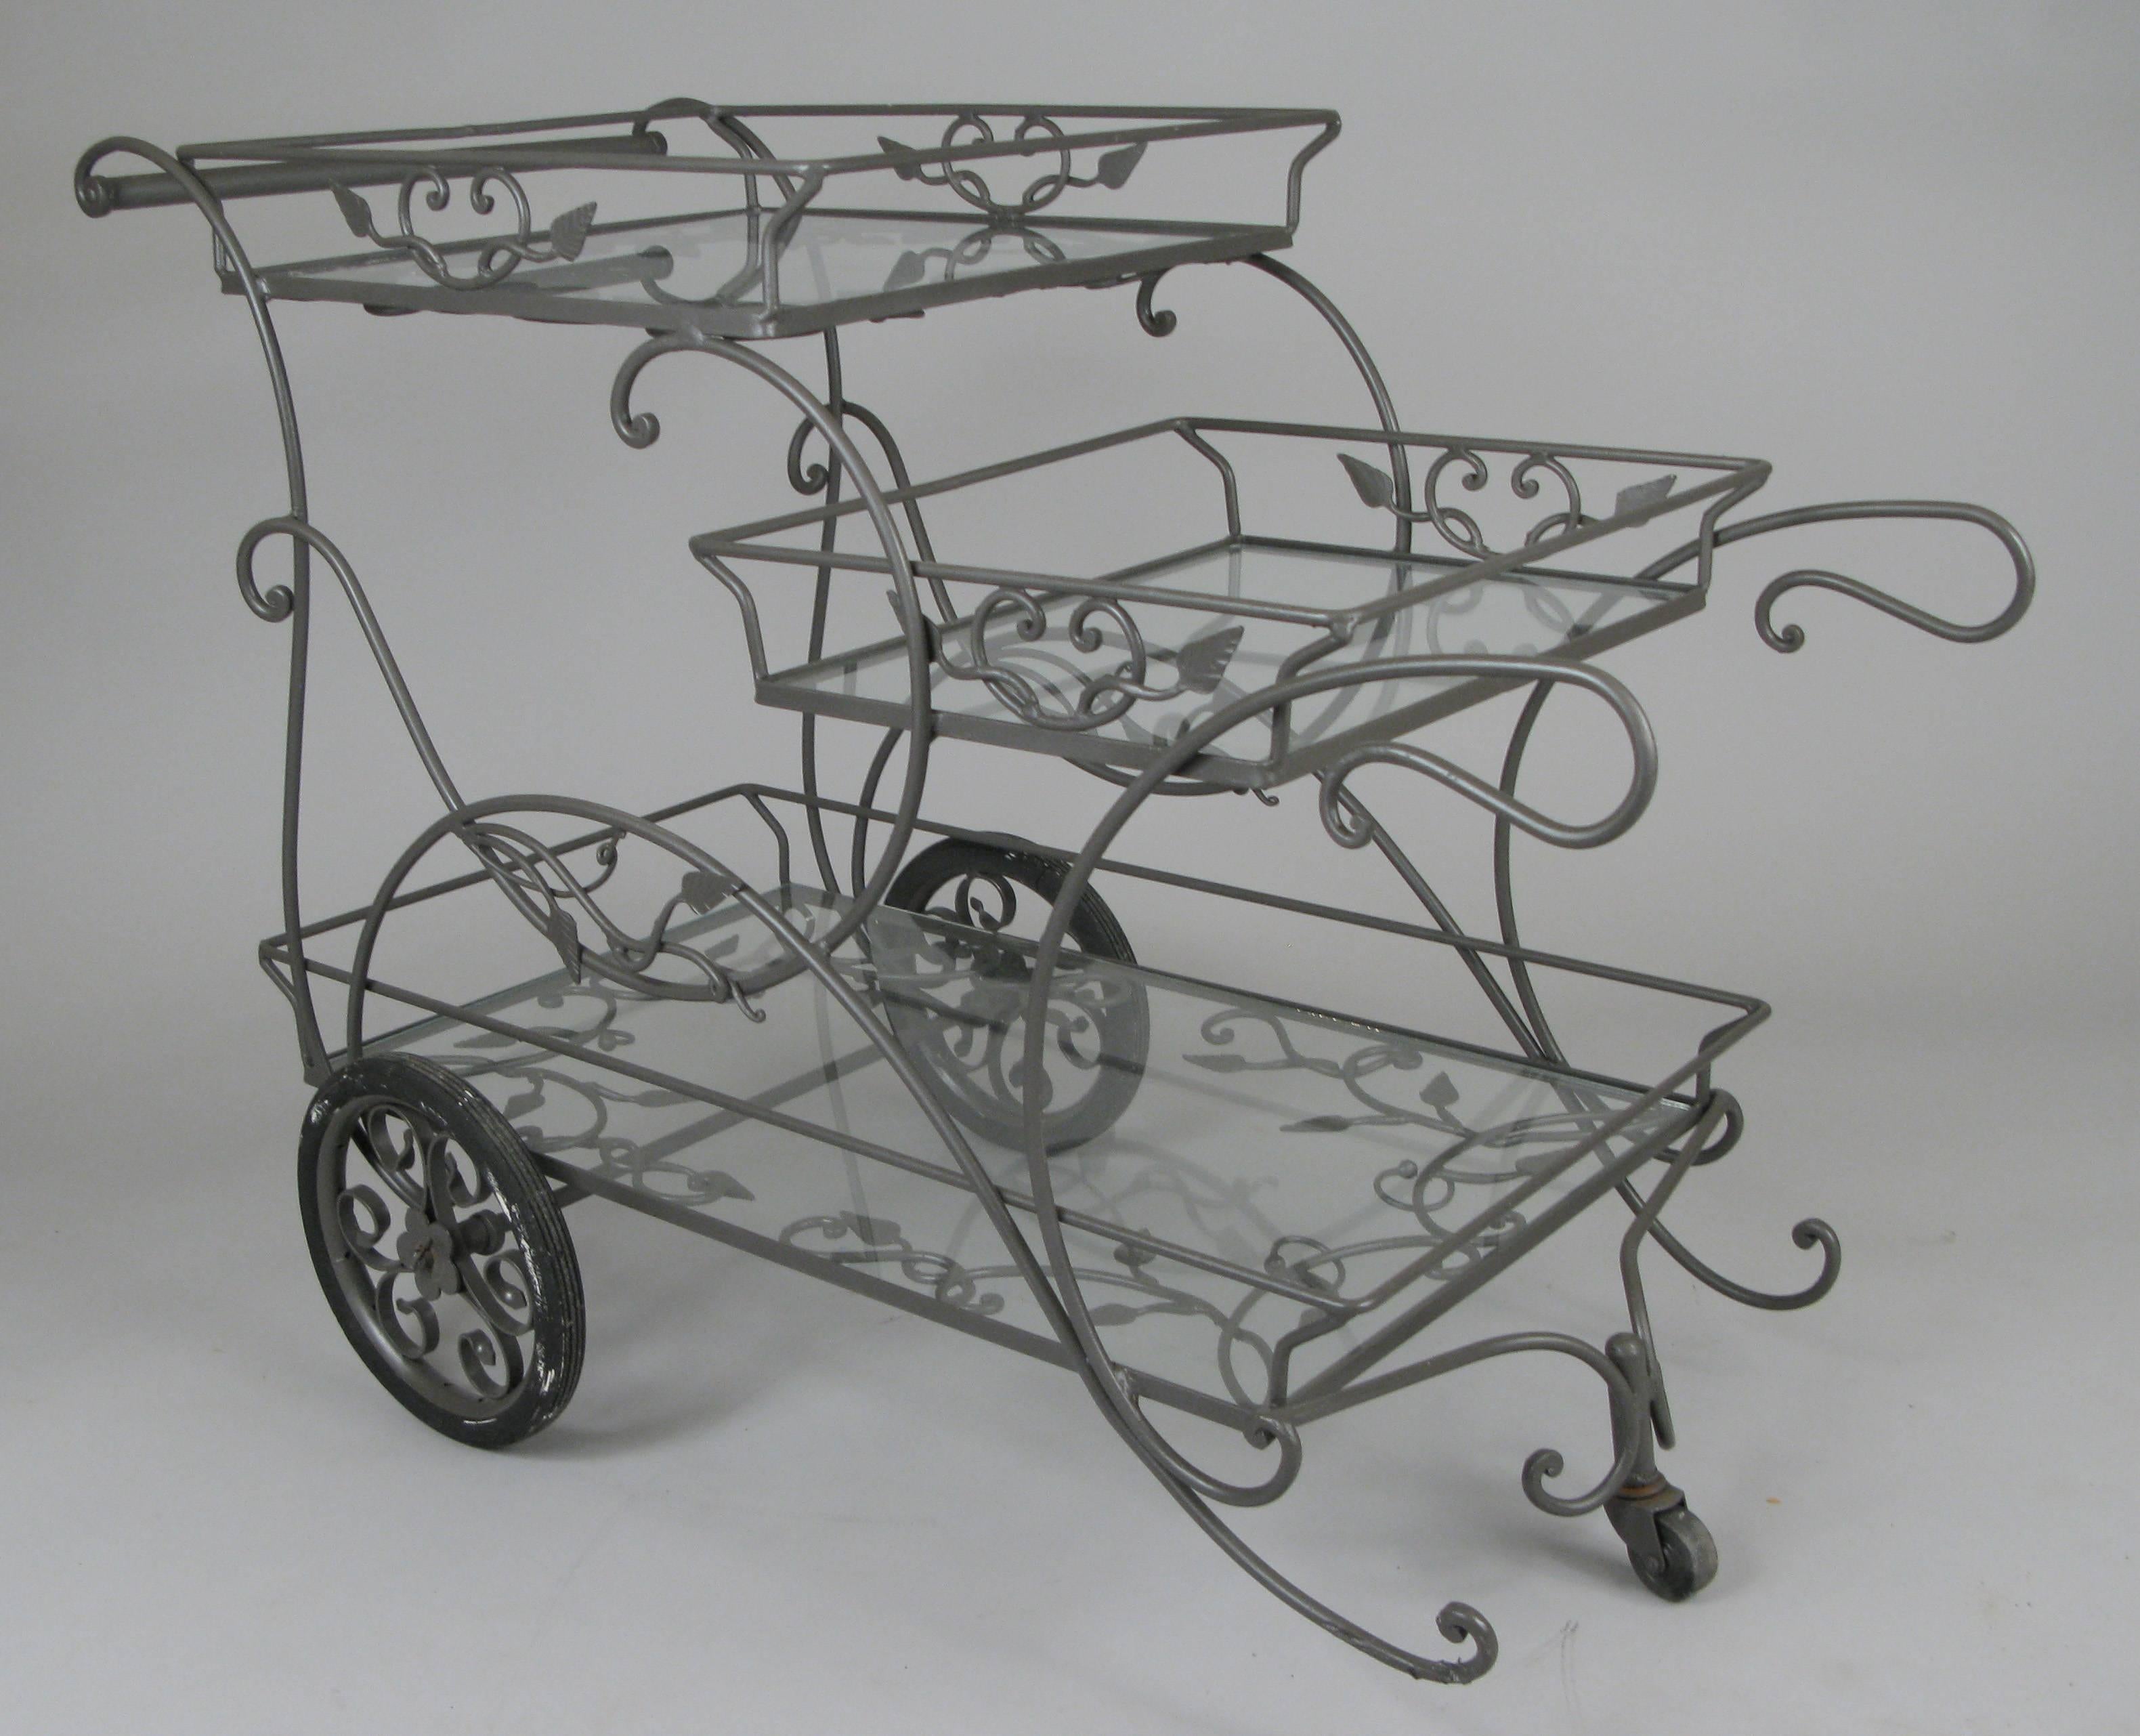 A beautiful vintage 1950s rolling bar cart in wrought iron by Woodard, with three glass shelves for plenty of room for bottles and glassware. The frame decorated with scrolls and ivy. Finished in a greige painted finish.